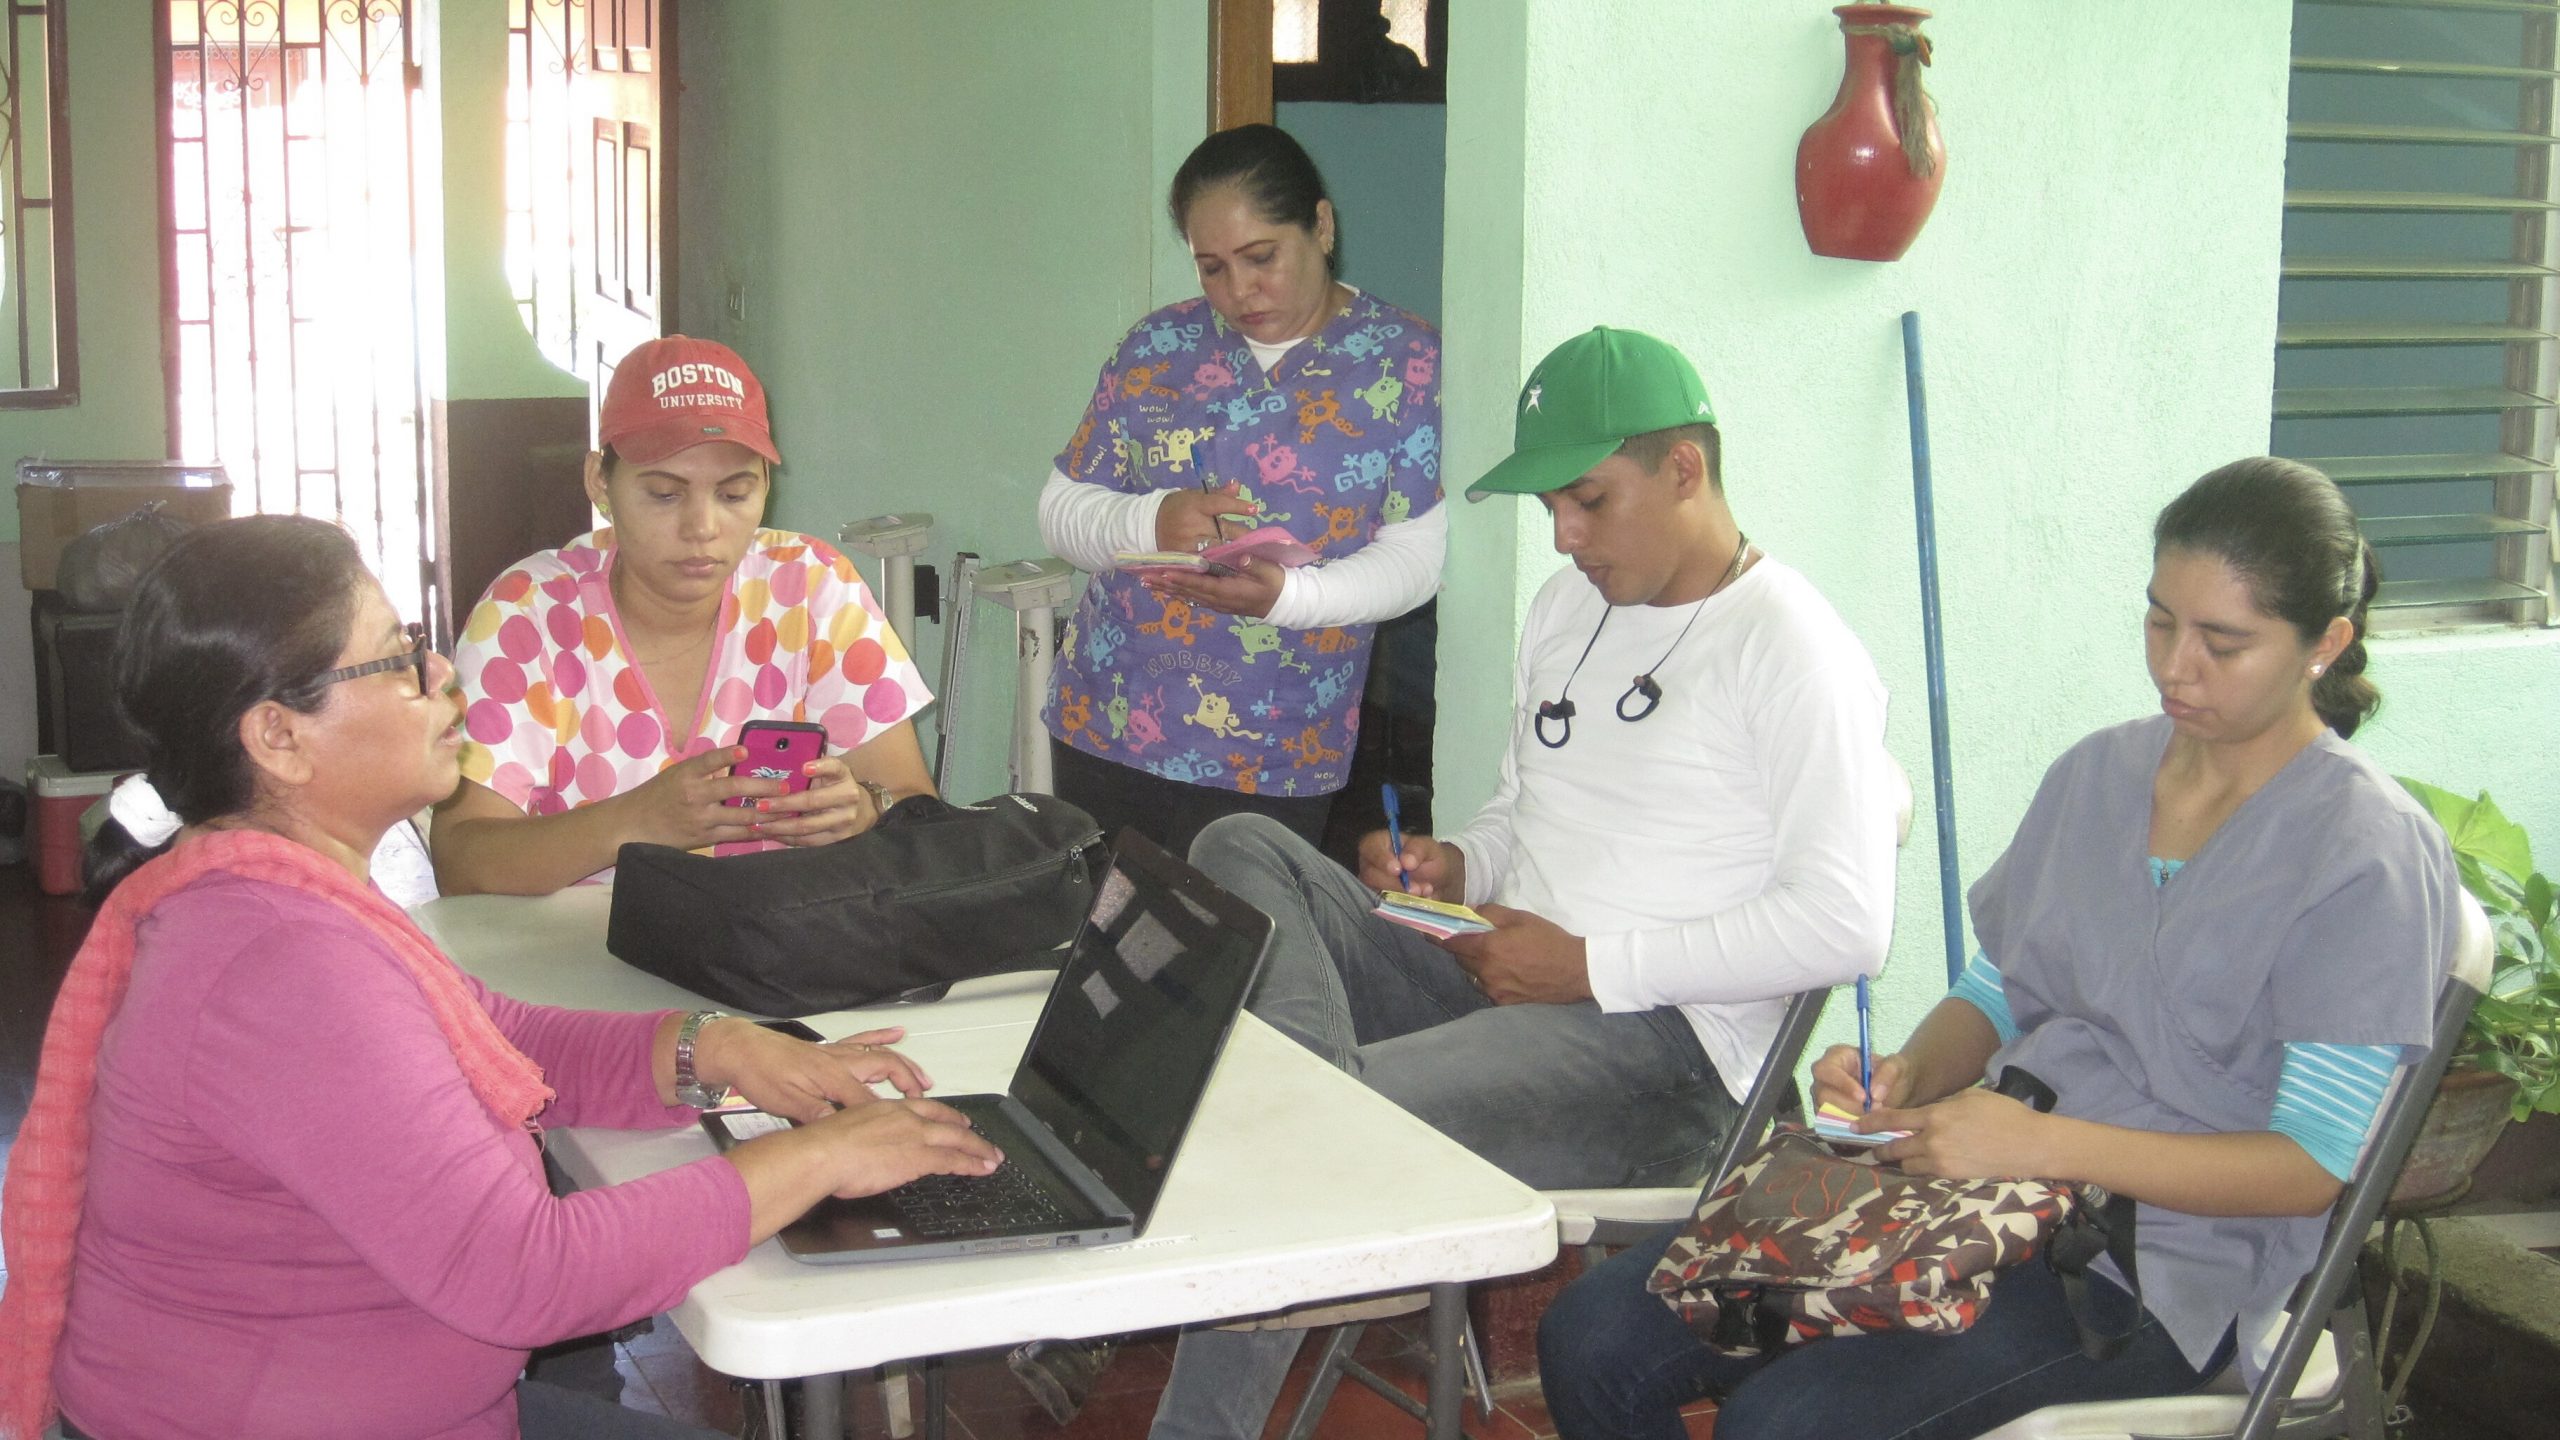 a picture of Nicaraguan Team. woman on the left is typing on a computer, the woman next to her is looking at her phone, the next woman is standing while taking notes, the men next to her is sitting down while taking notes, the woman next to him is sitting down while taking notes. they are all around a table.